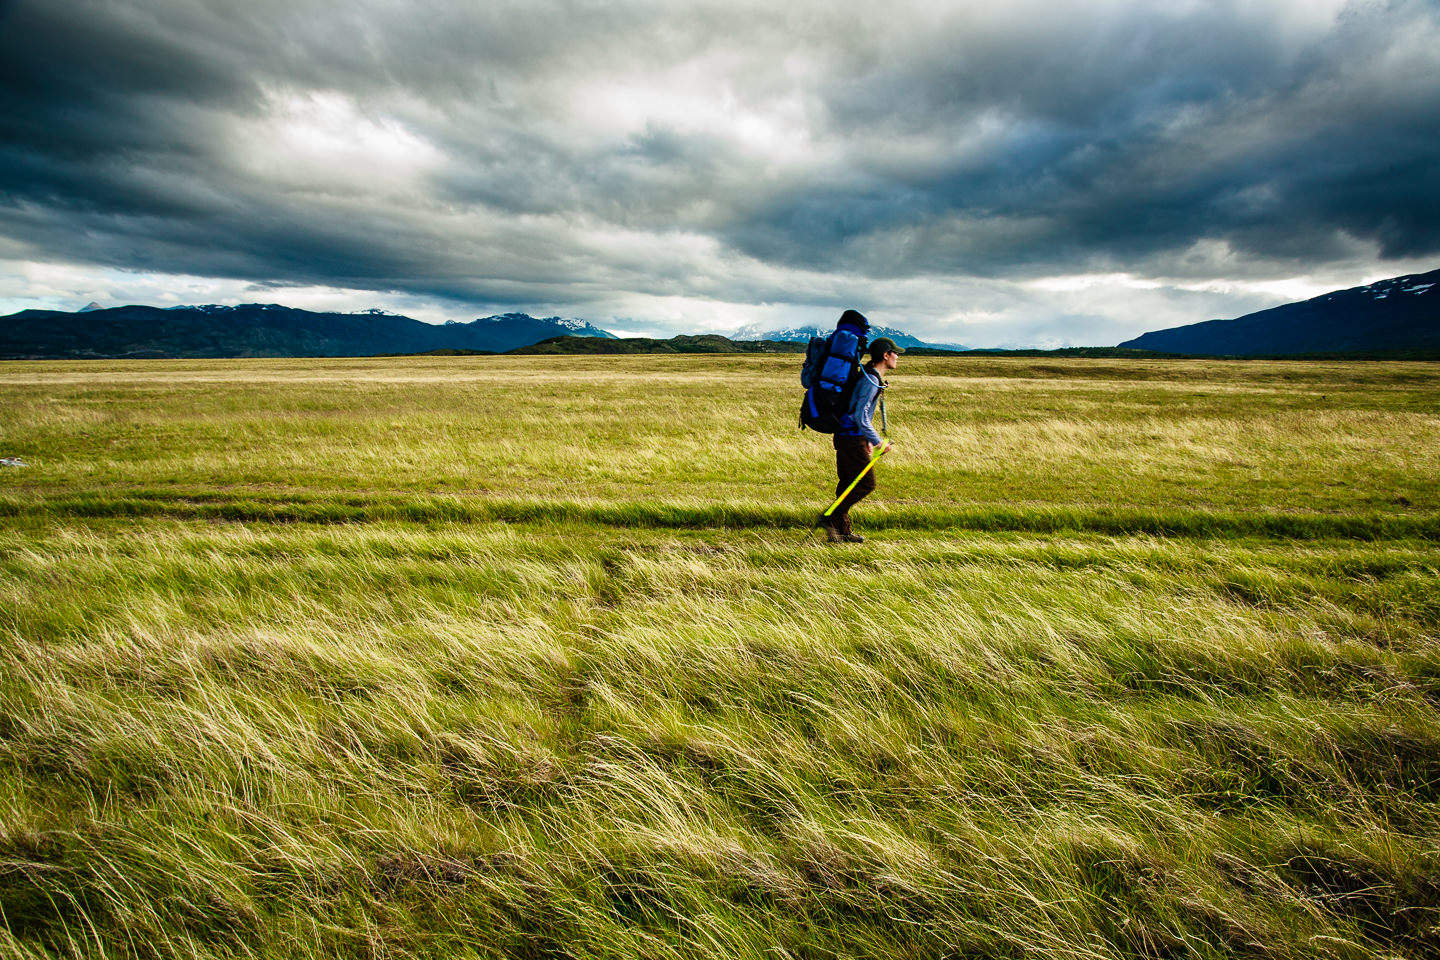 Walking on the pampas in Torres del Paine, Patagonia.